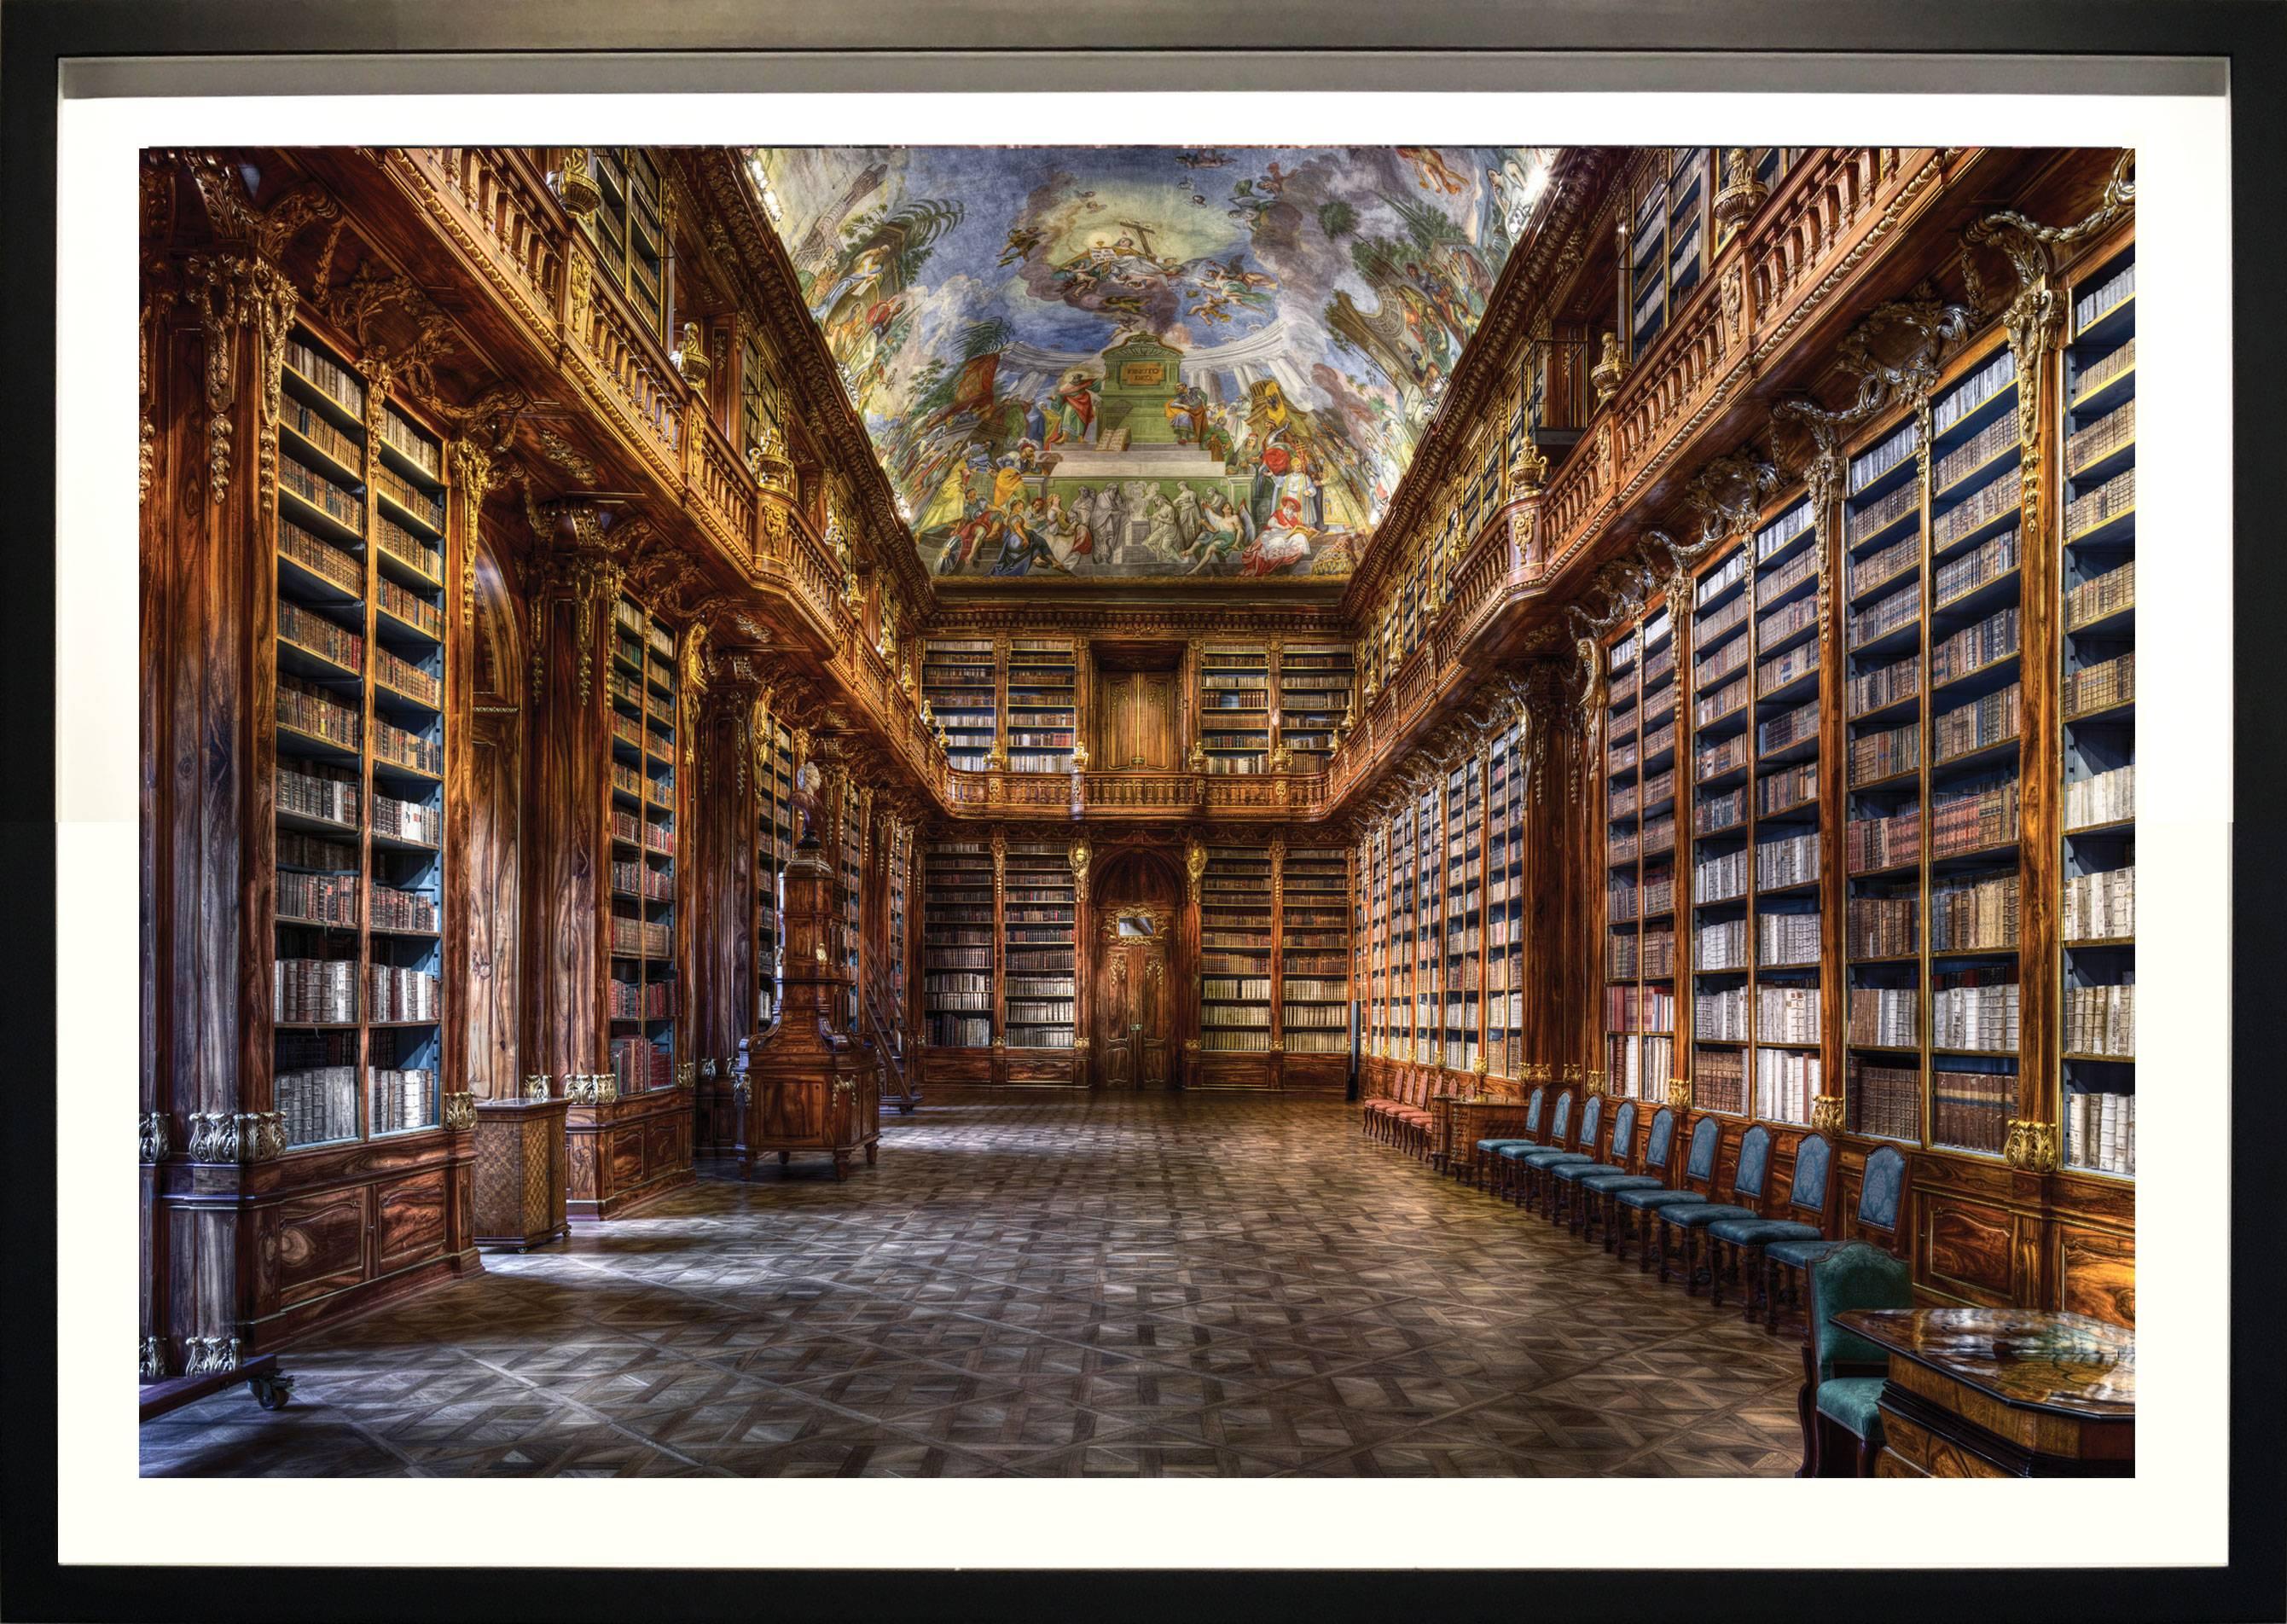 Philosophical Hall - Strahov Monastery - Photograph by Christian Voigt